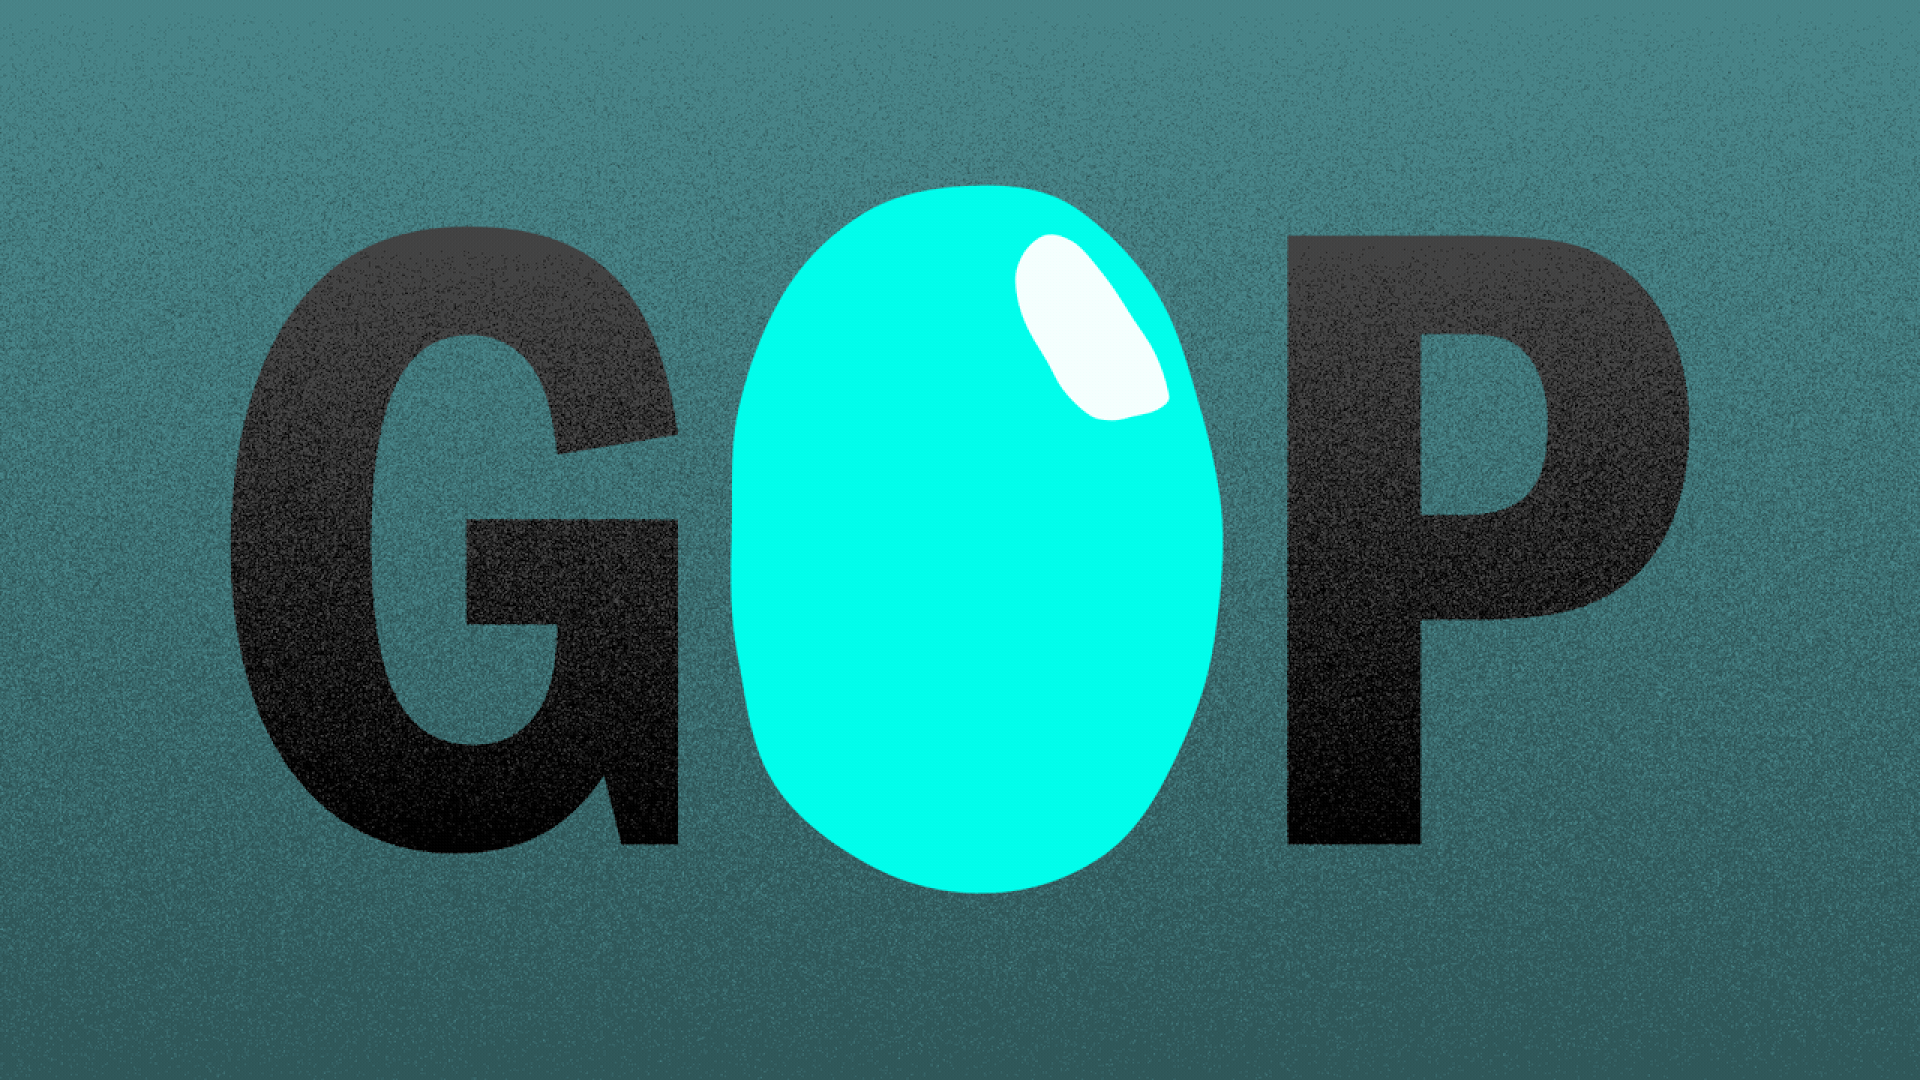 Photo illustration of the word GOP, with the O as a bubble that pops, revealing the profile of Donald Trump.